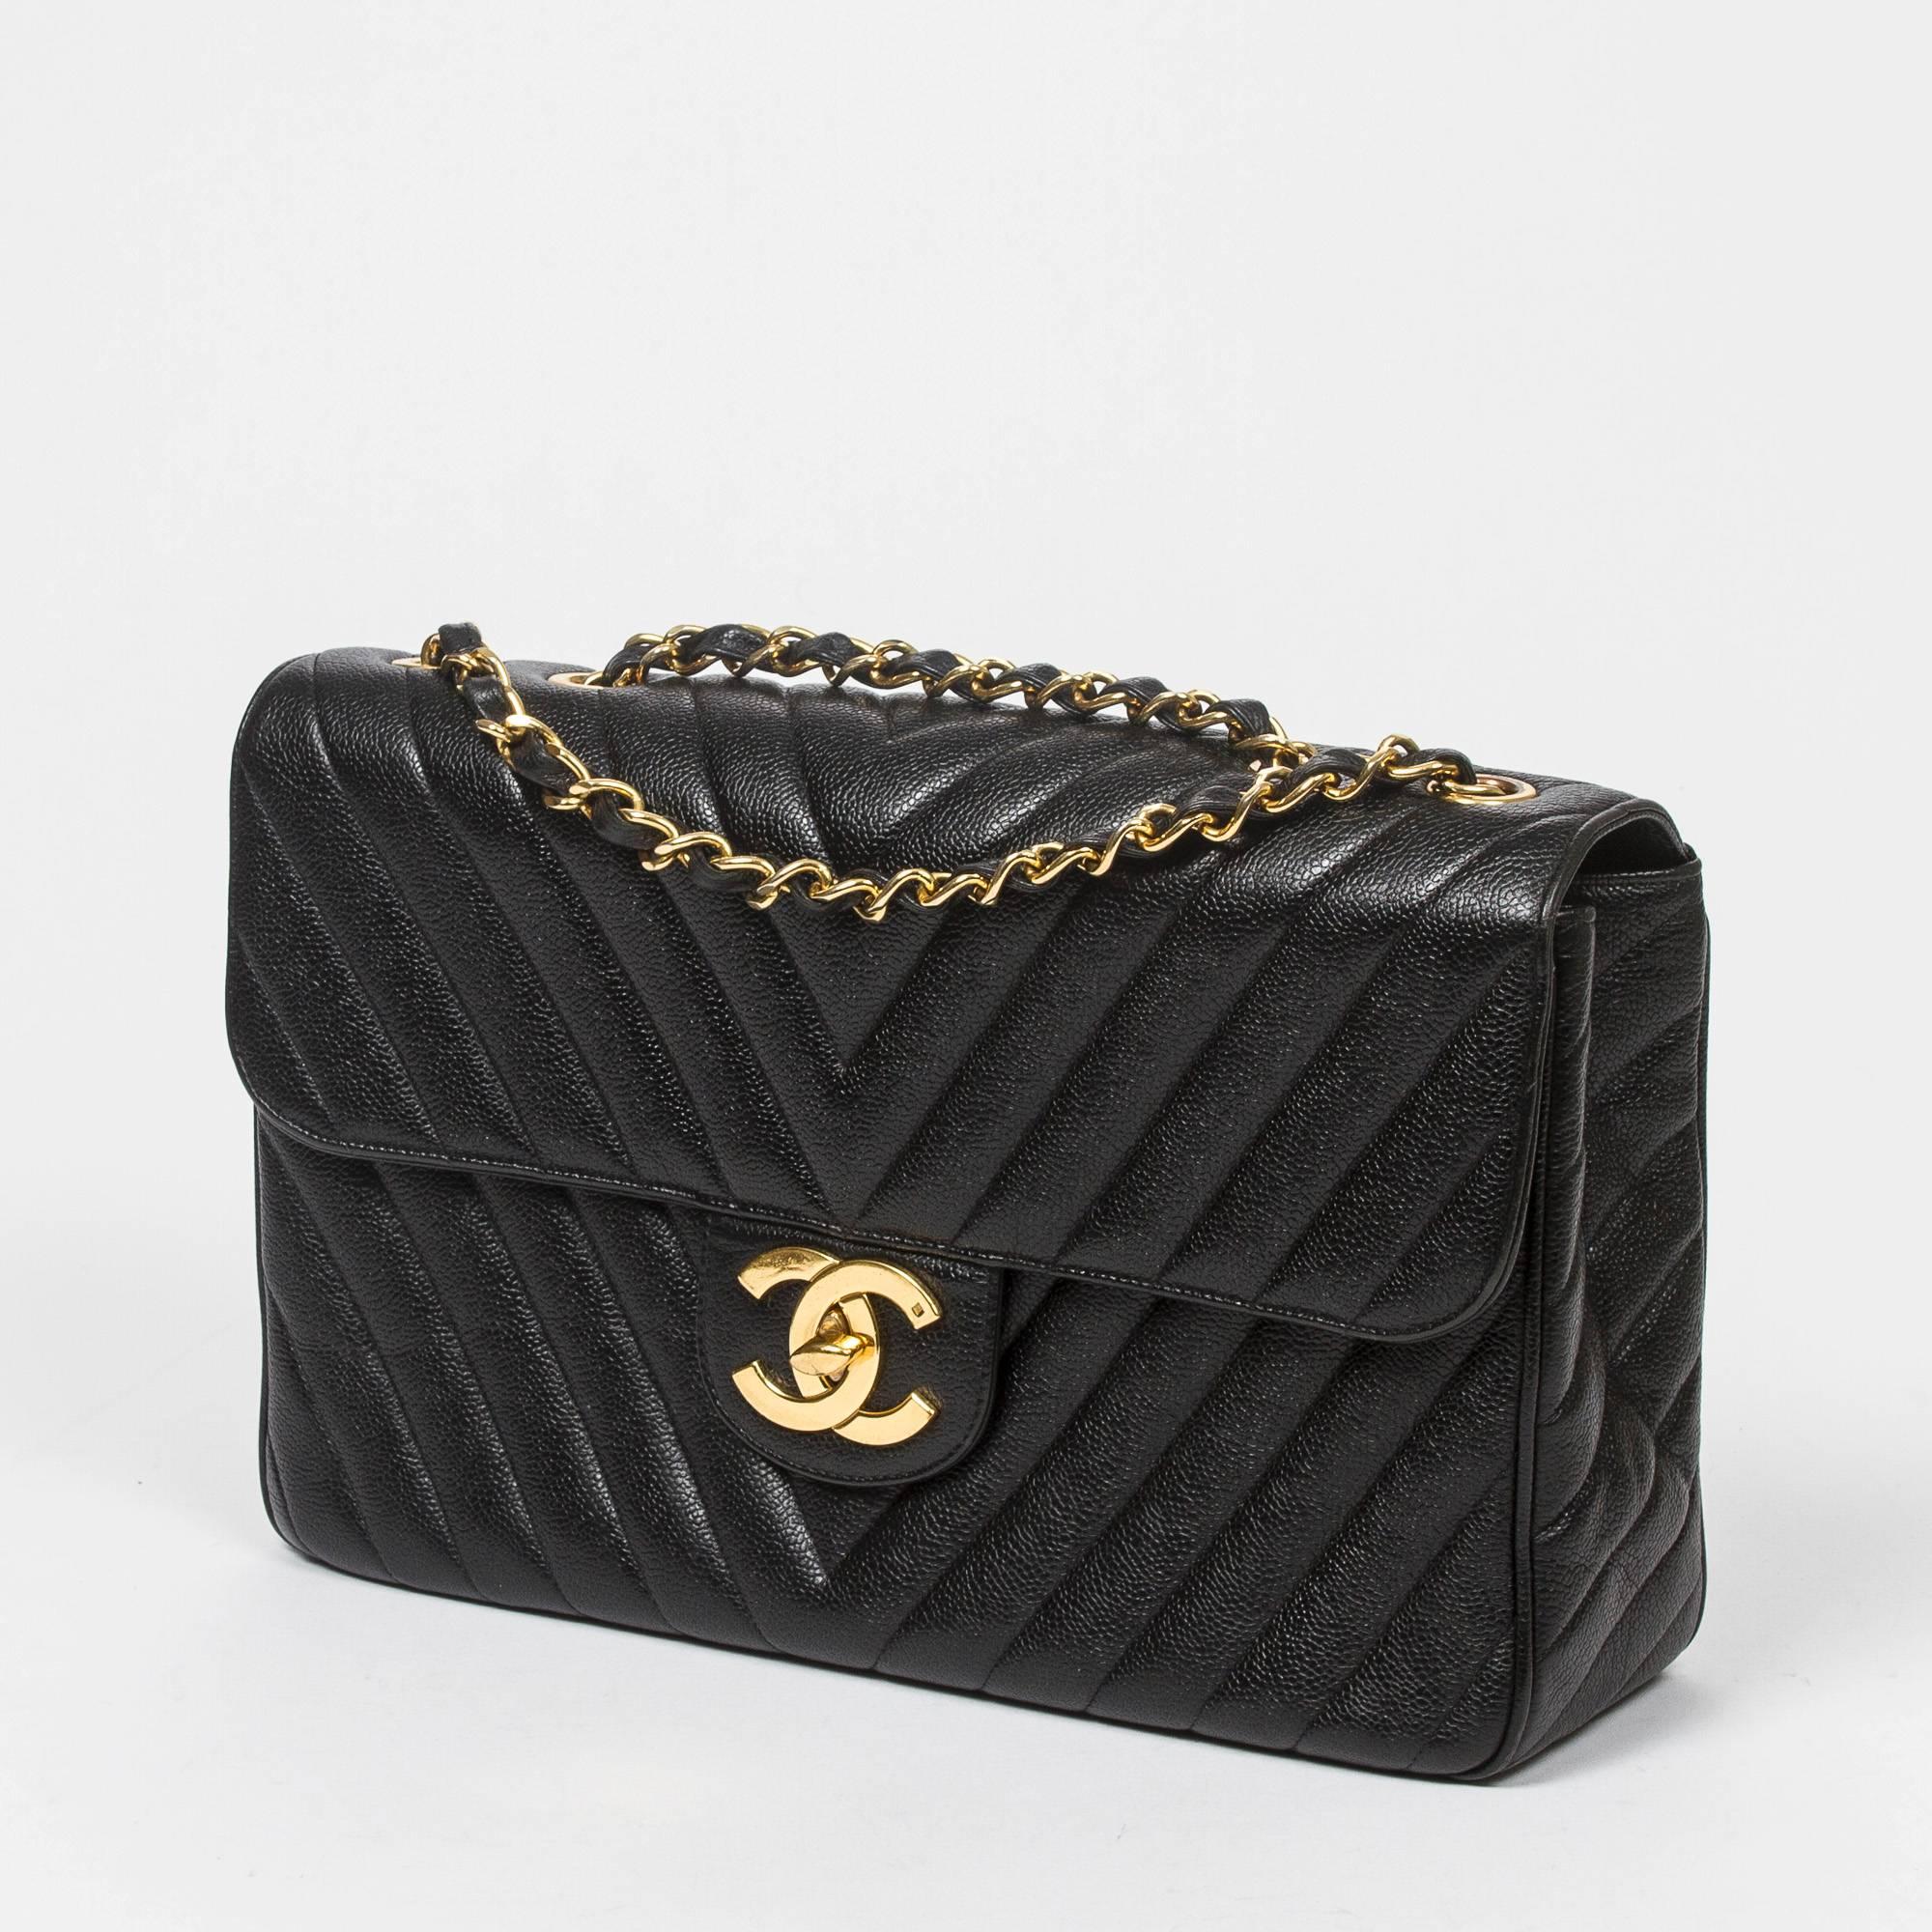 Jumbo Maxi in black chevron quilted caviar leather with double chain strap interlaced with leather, large gold tone CC turnlock. Large back slip pocket. Black leather lined interior with one slip pocket and one zip pocket. Gold tone 